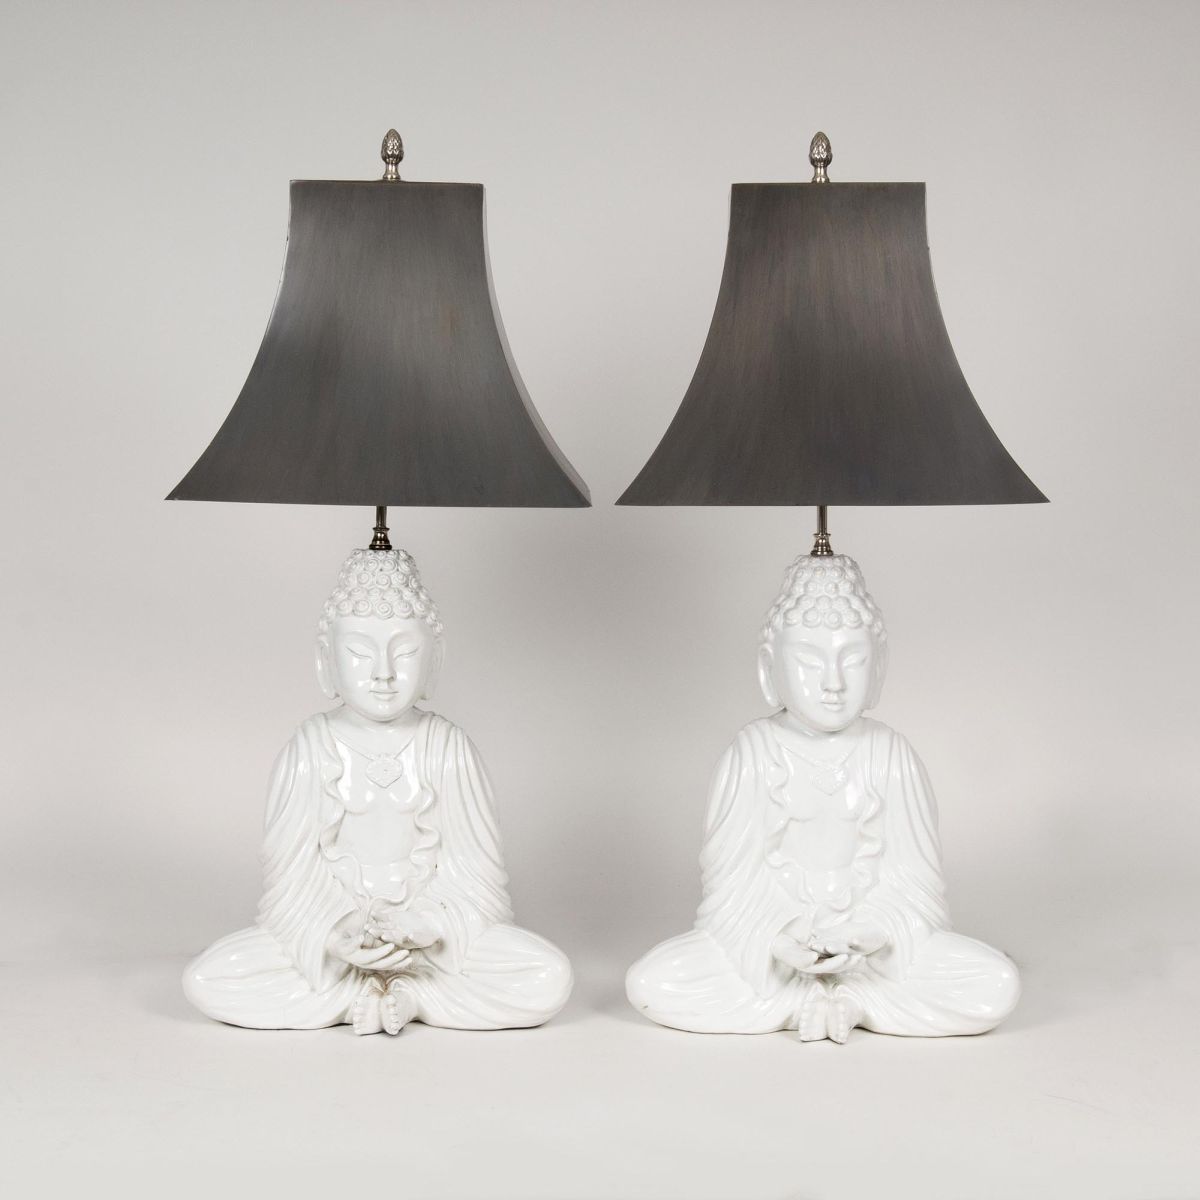 A Pair of Decorative Table Lamps 'Seated Buddha'